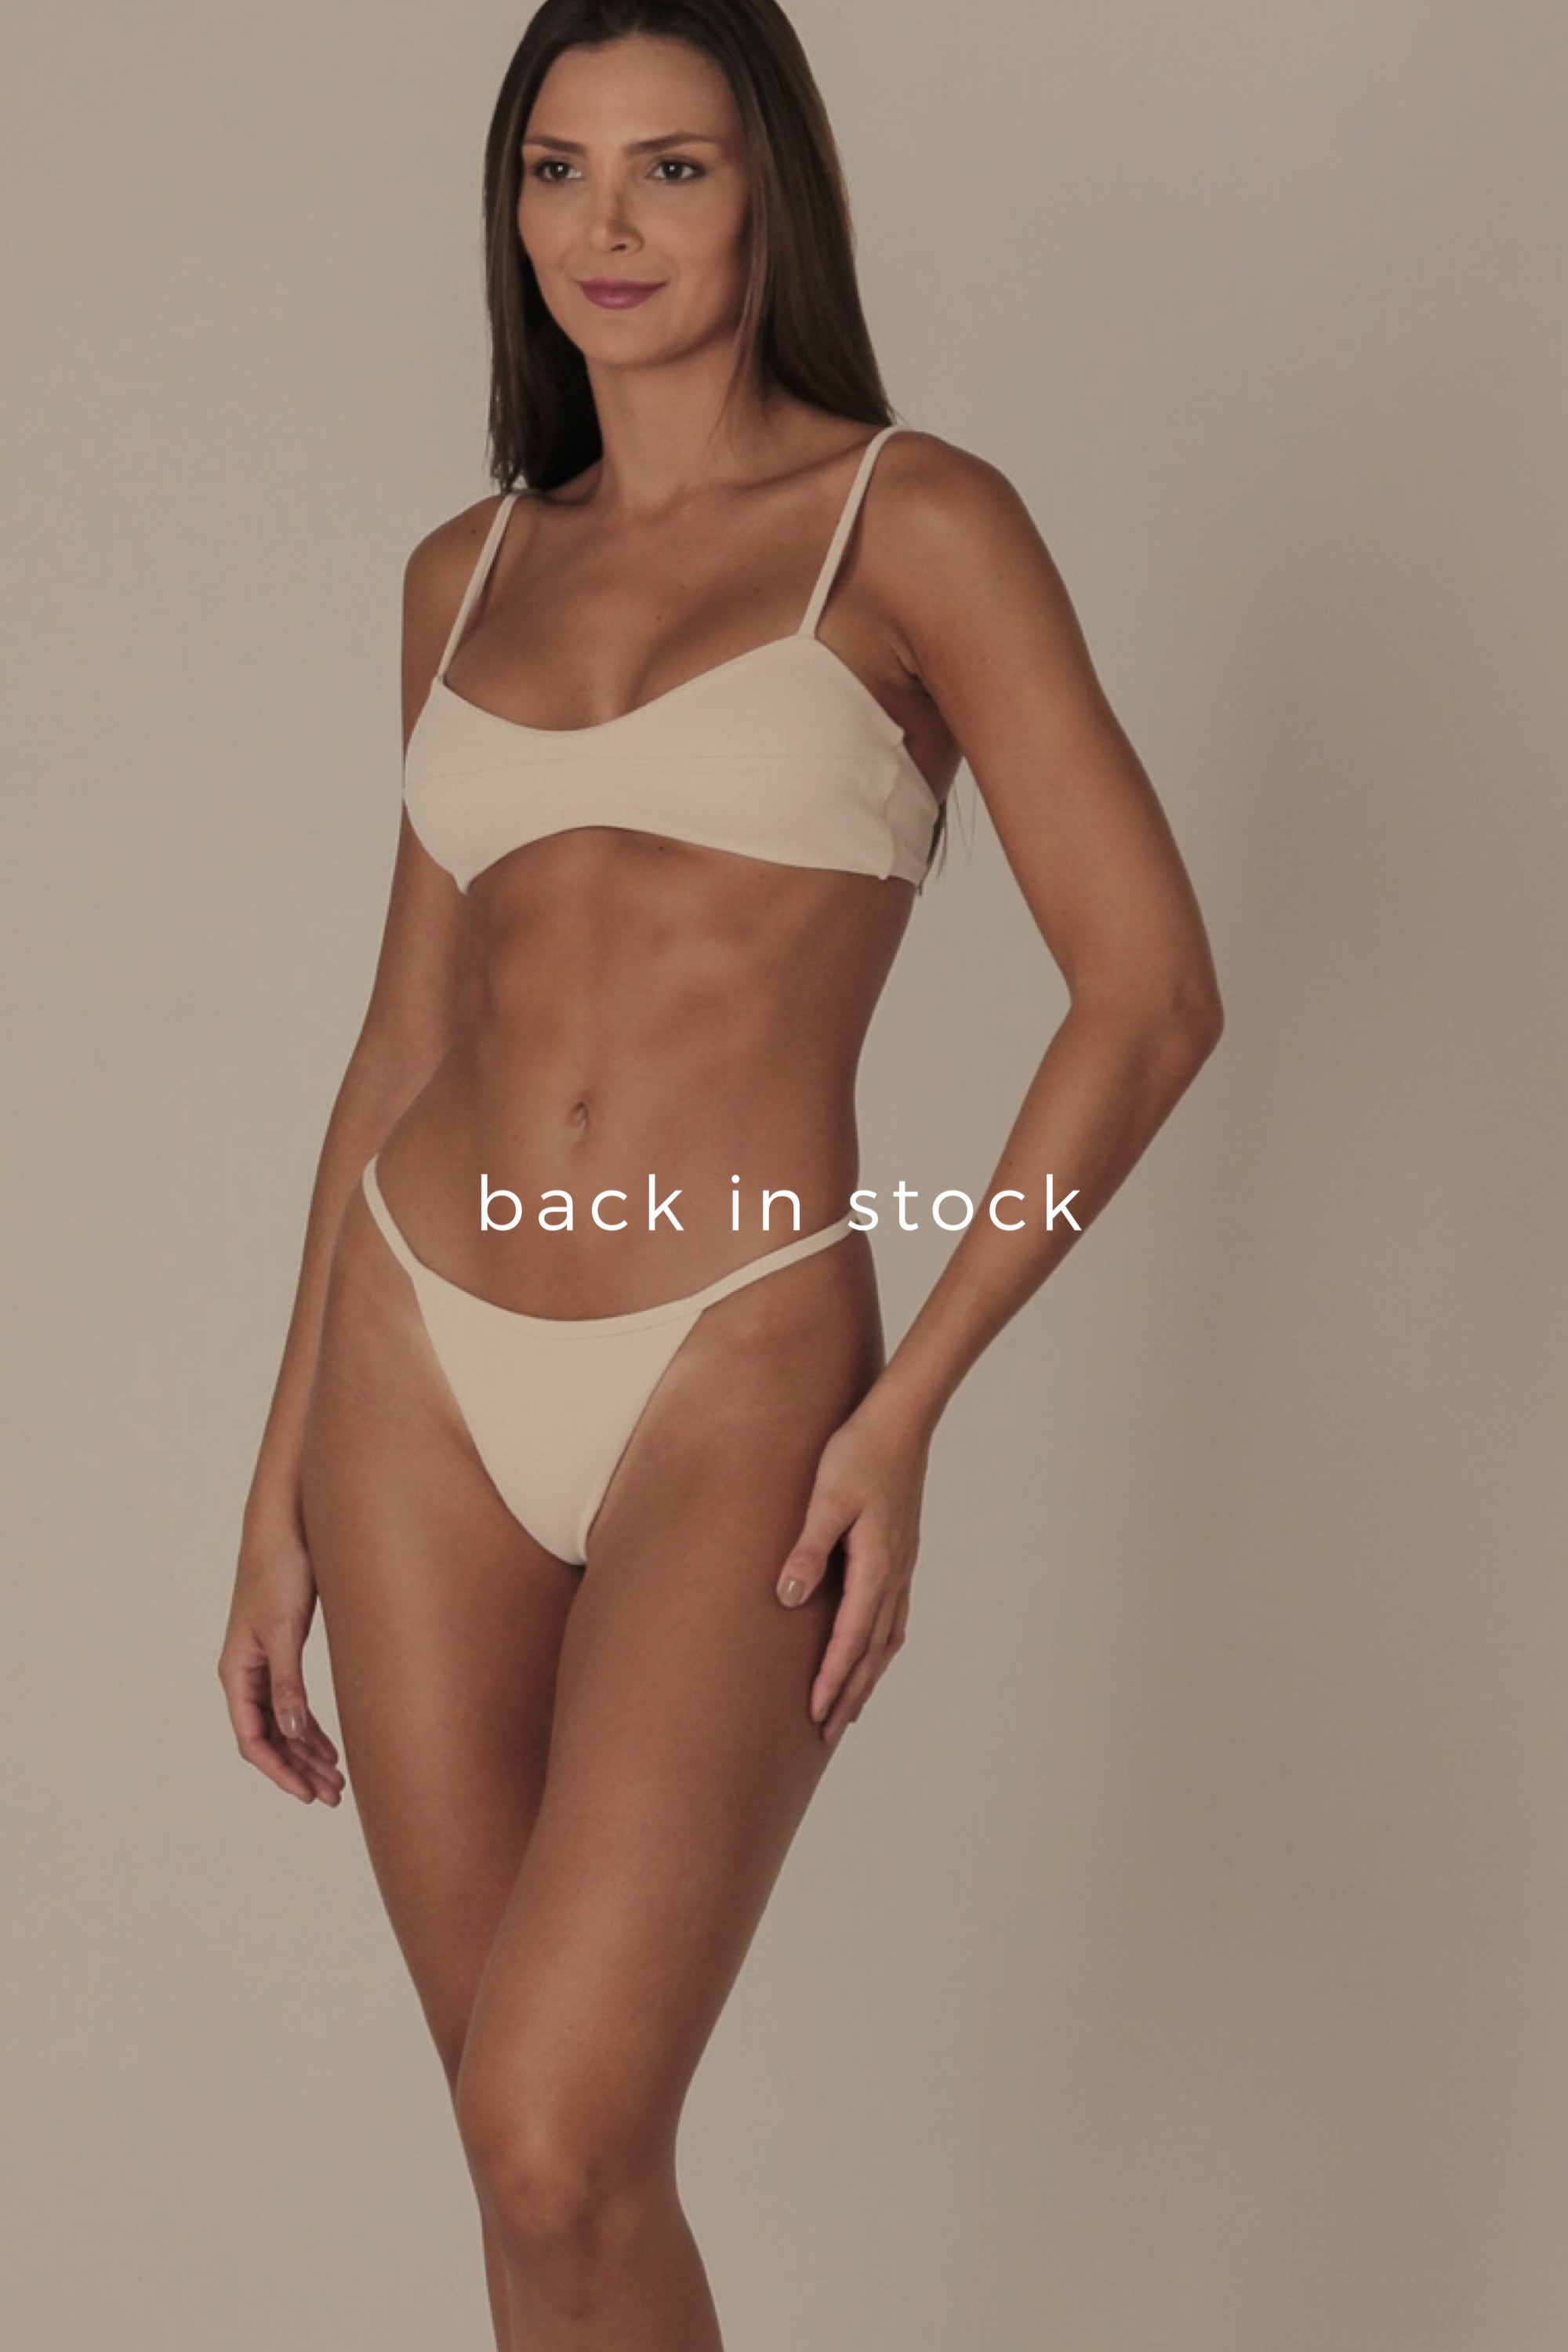 Banner Apoio 2 - back in stock